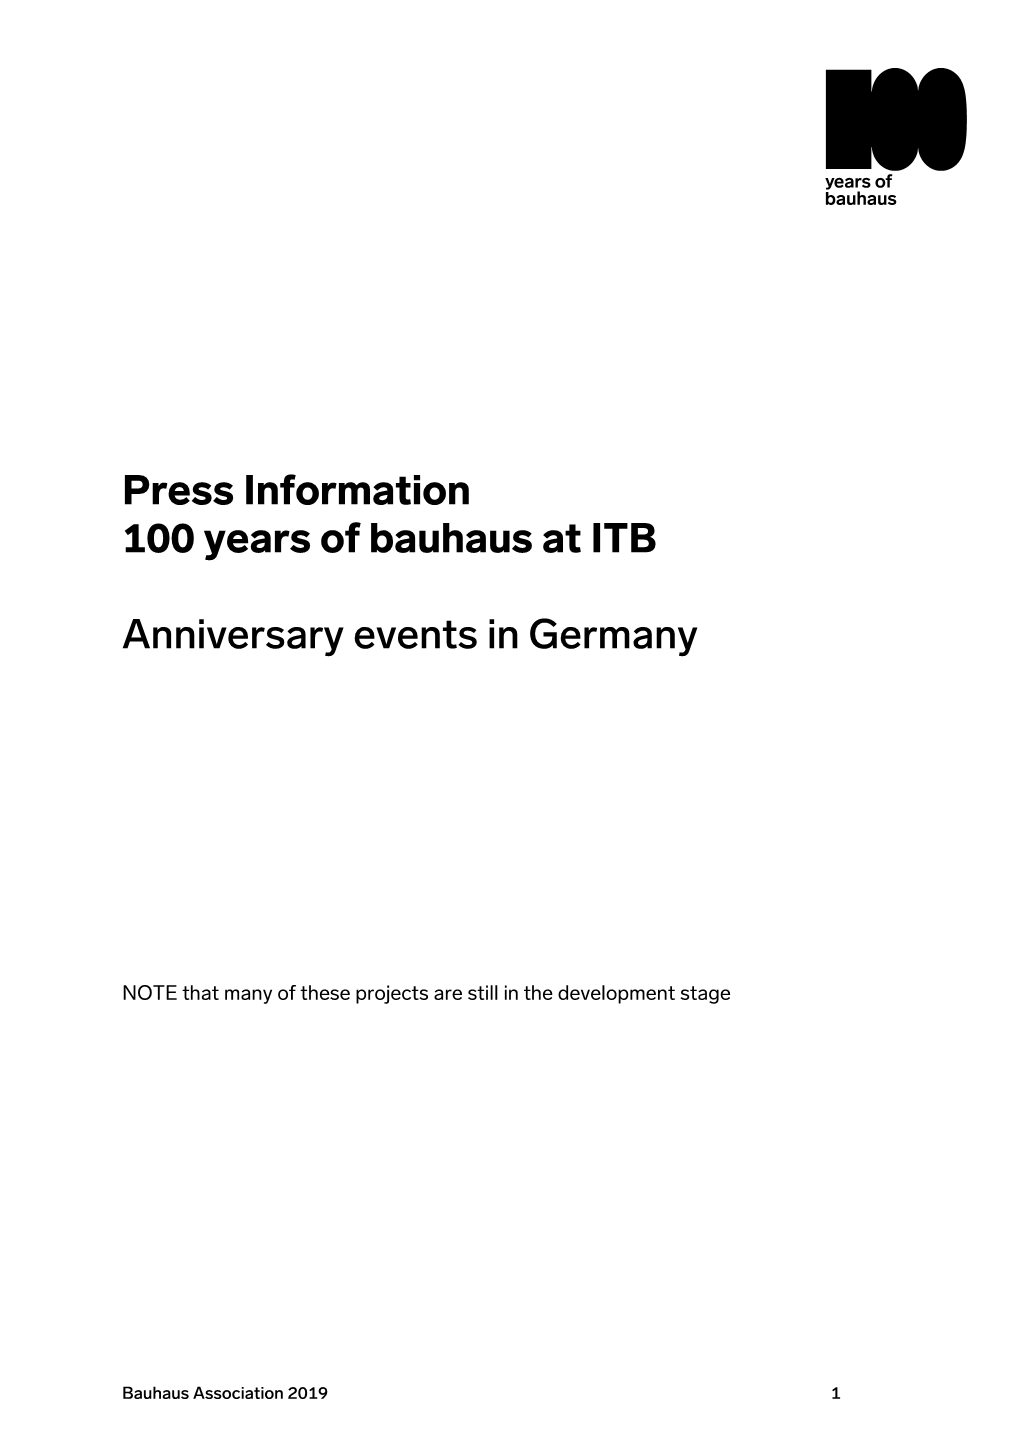 Press Information 100 Years of Bauhaus at ITB Anniversary Events